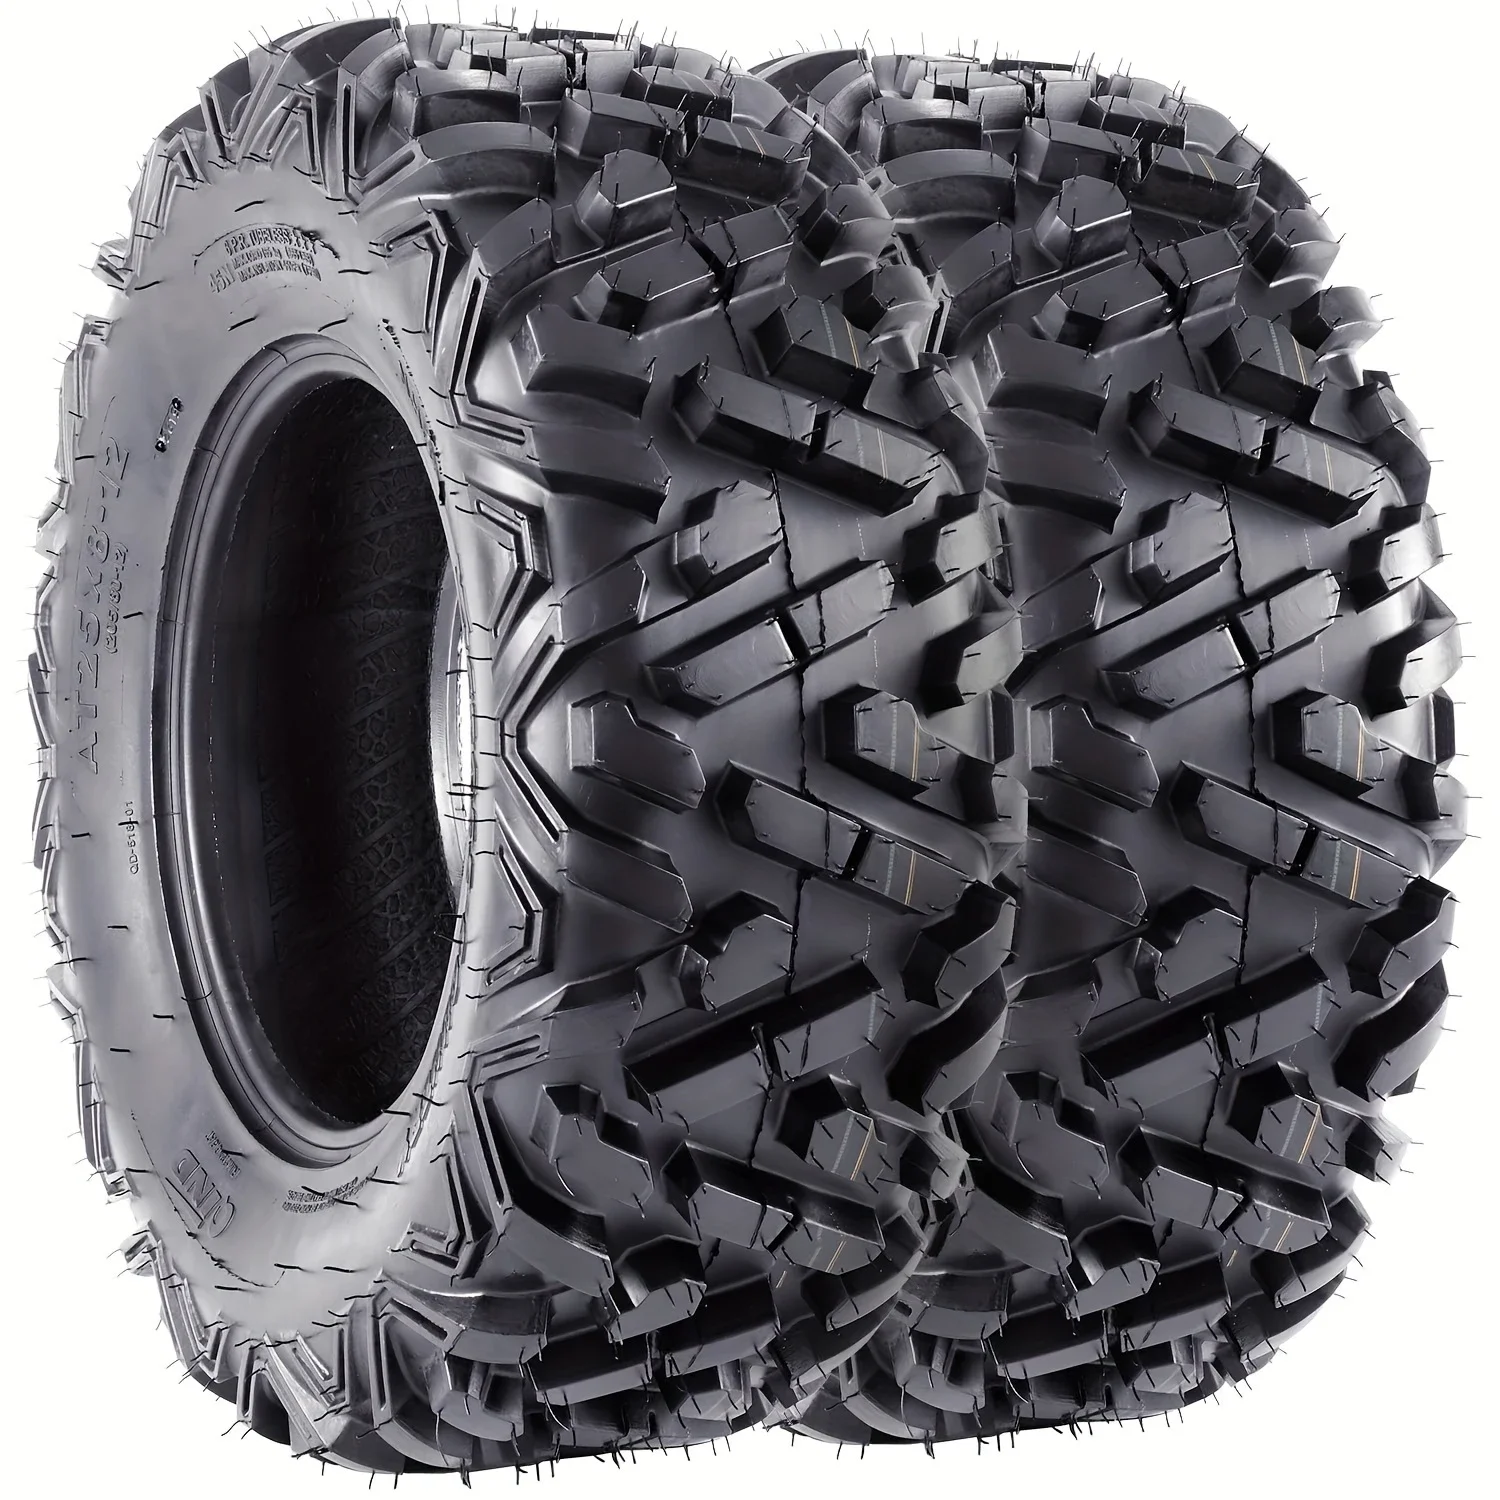 

Enhanced Traction Heavy-Duty 6-Ply Reinforced 25x10-12 ATV Mud Tires - All-Terrain Grip for UTV/SxS - Set of 2 Pieces